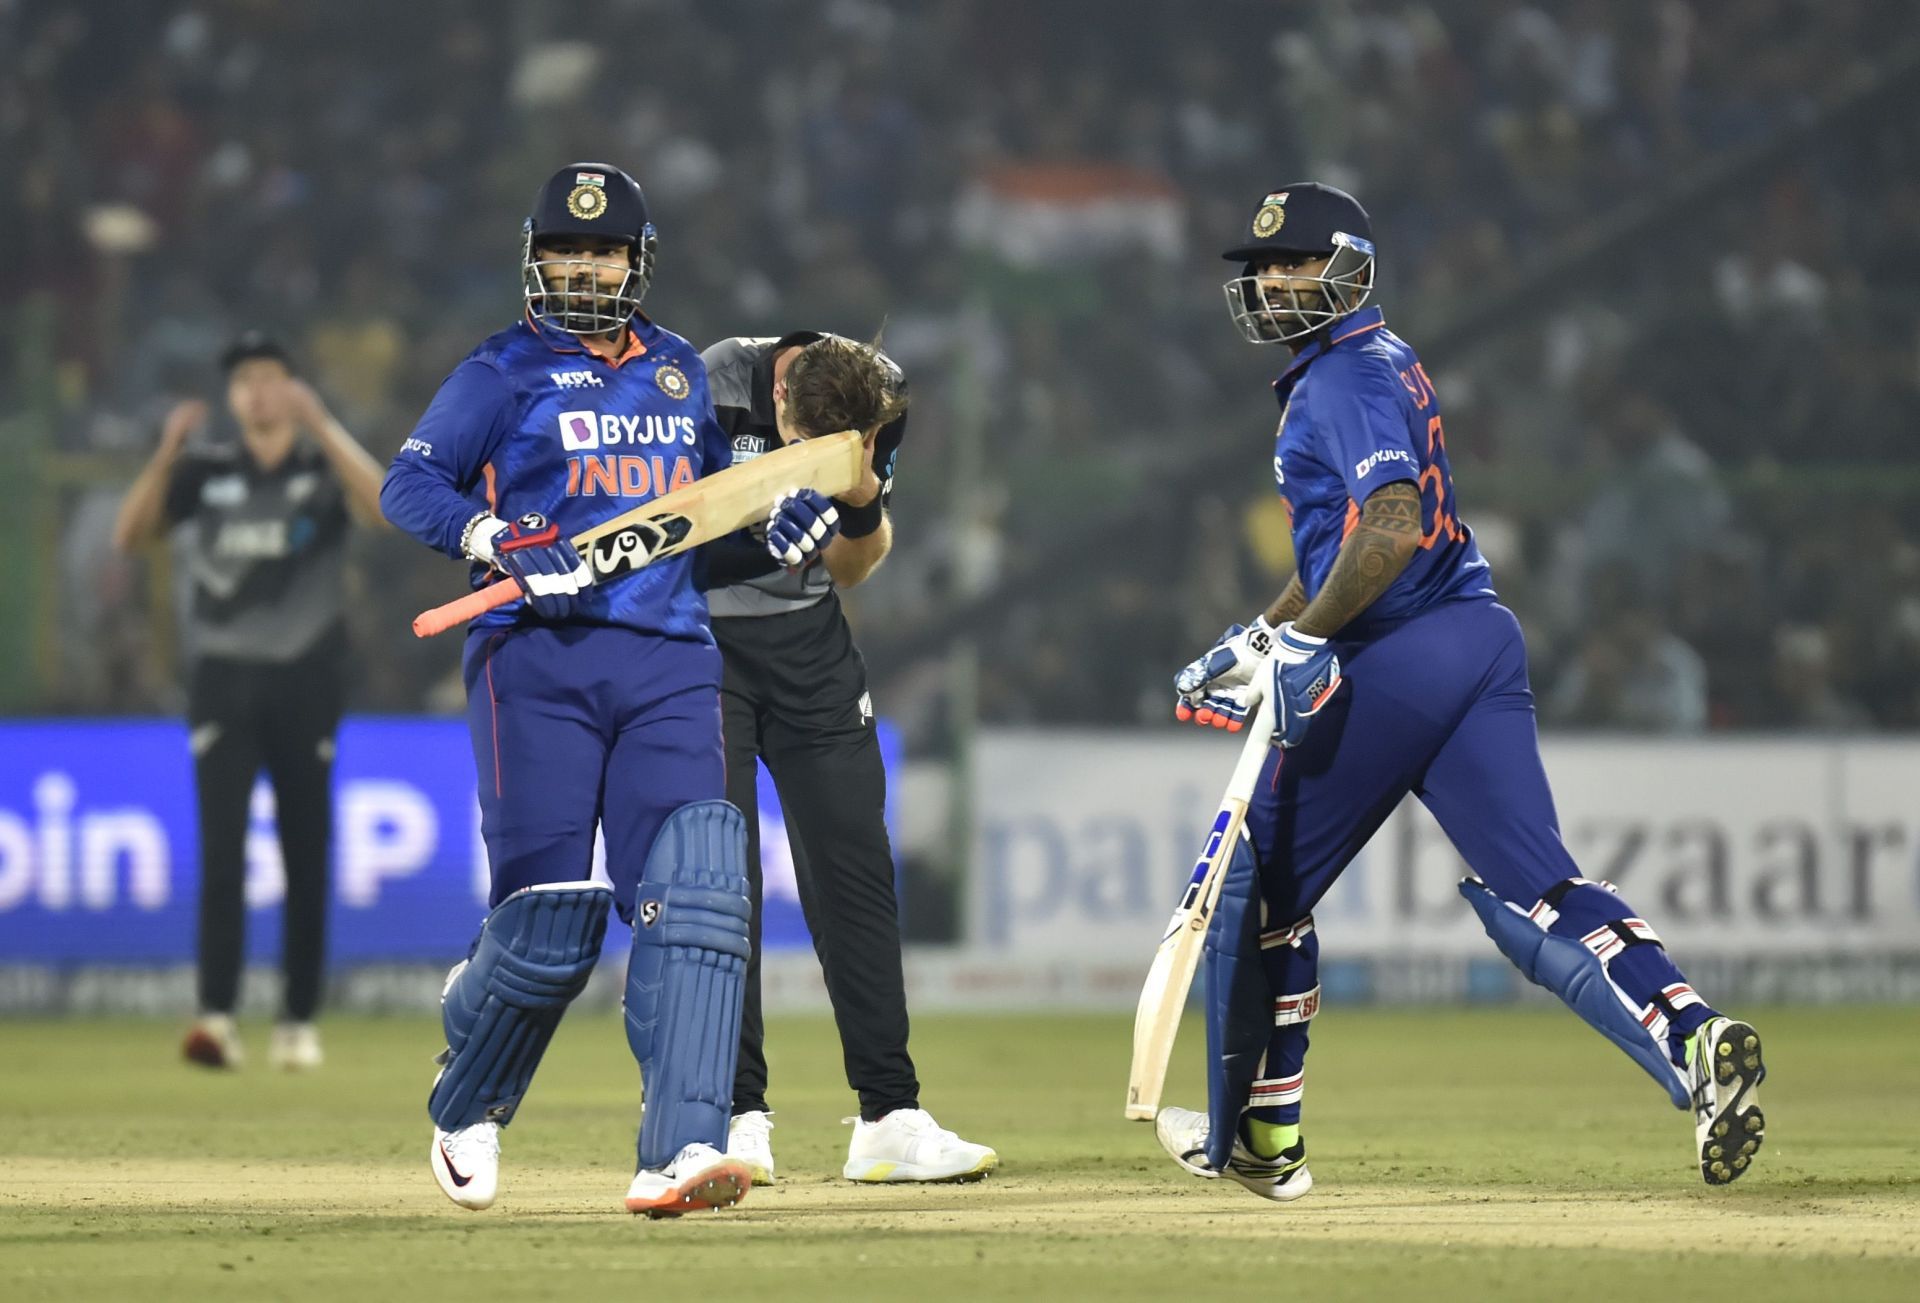 Suryakumar Yadav and Rishabh Pant have proved themselves as match-winners for Team India. (Image: Getty)